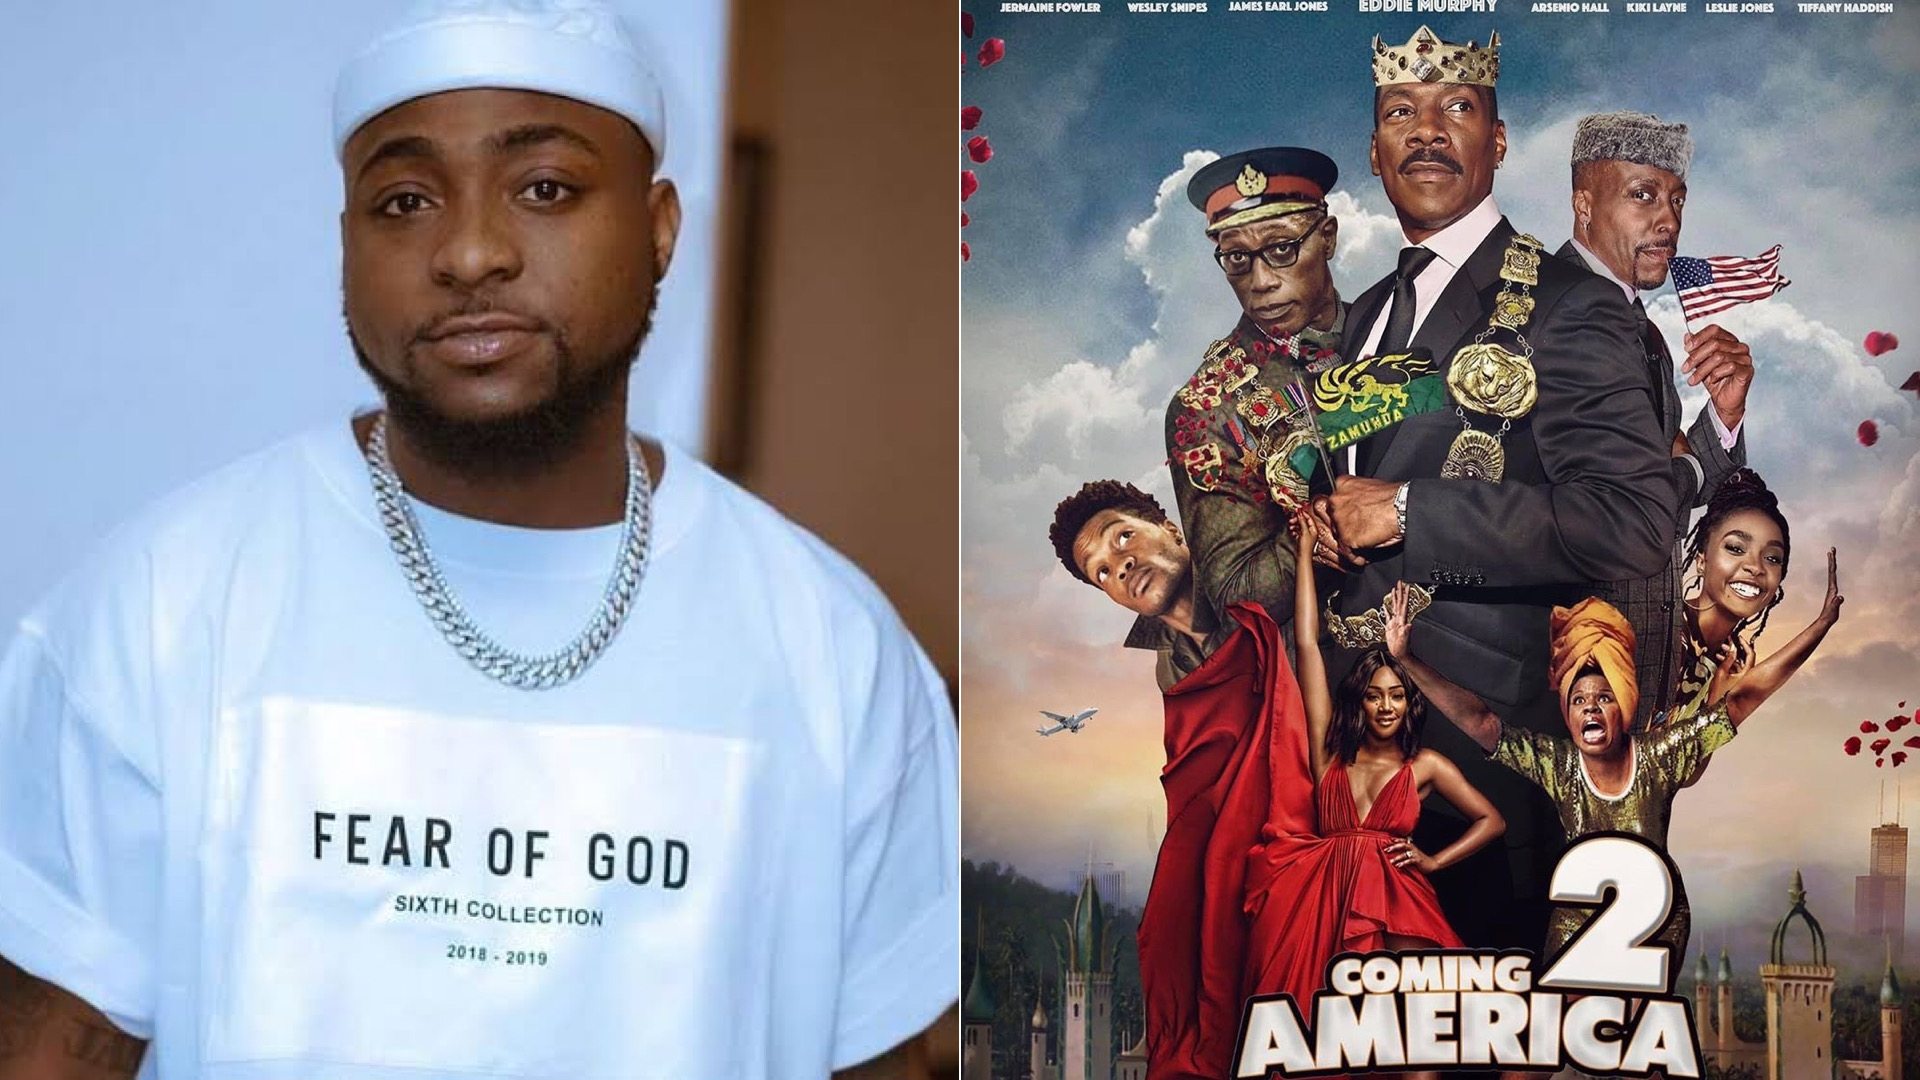 Davido to feature in "Coming to America 2"